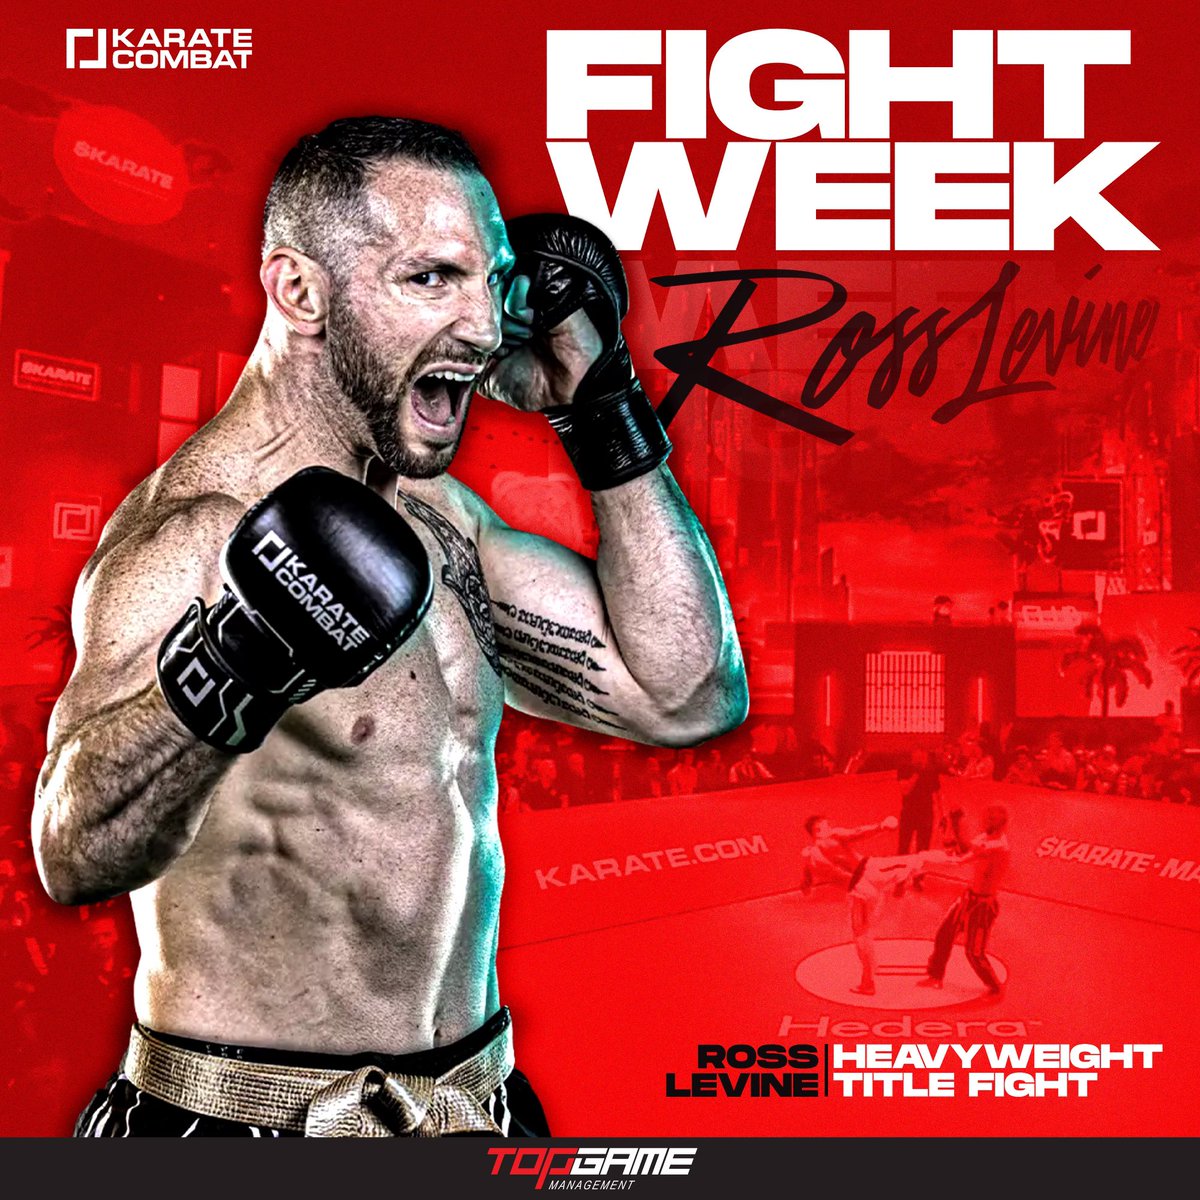 👑 FIGHT WEEK 👑 Watch Ross stake his claim for double-champ status on Friday night LIVE from Las Vegas. Catch the action on all Karate Combat social media platforms! 👀 Let’s Go Team Turbo! 🚀 #KC43 #NewEnglandMartialArts #TeamTopGame Art by TJ Carvalho 🎨